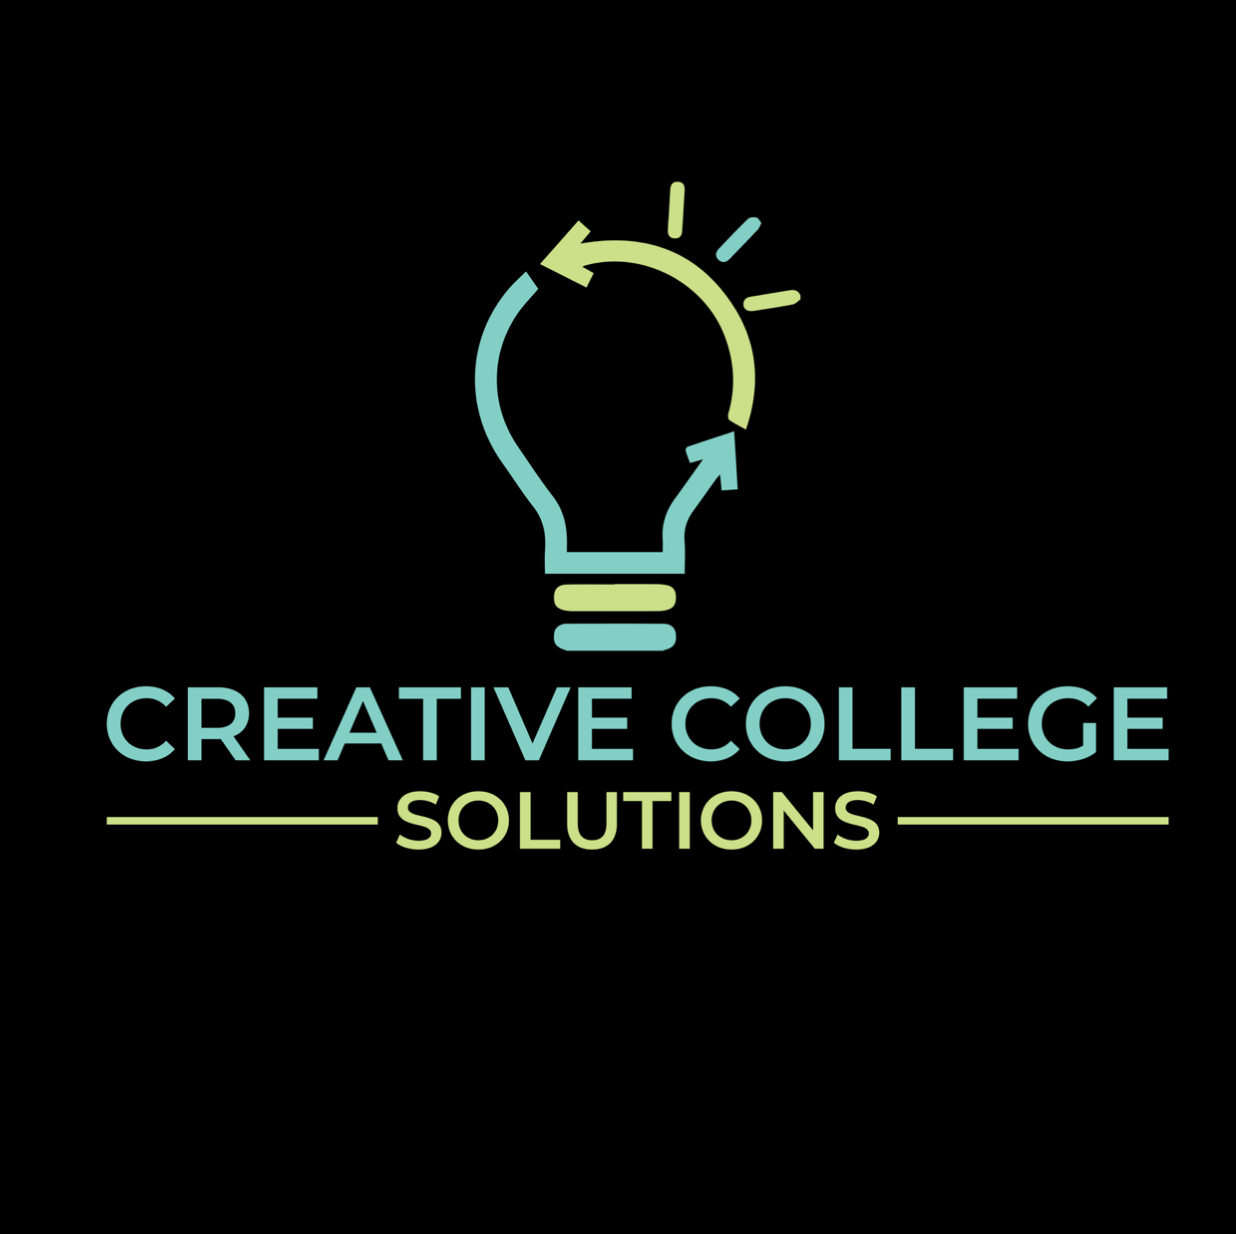 Creative College Solutions